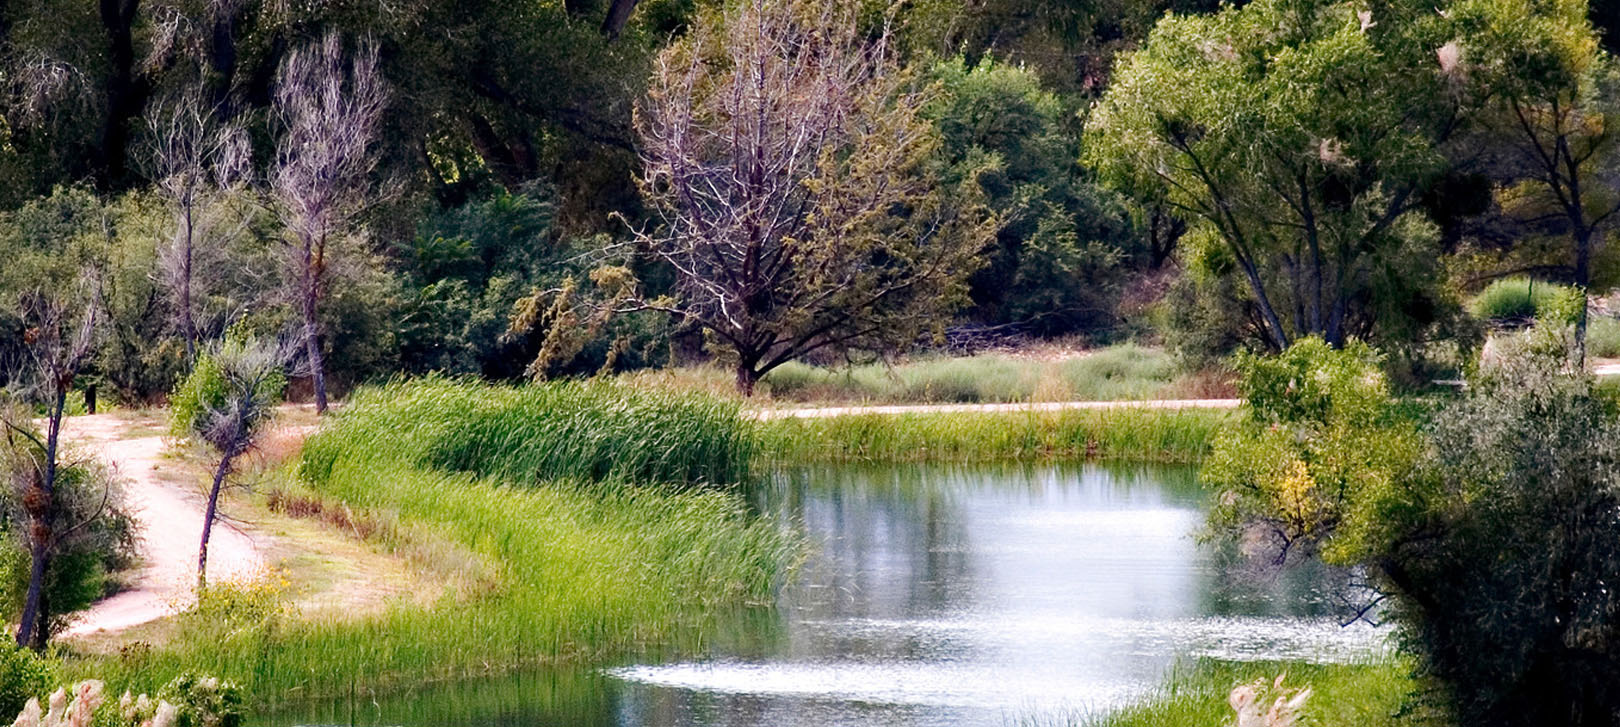 A view of the Verde River with green grasses and trees surrounding it.